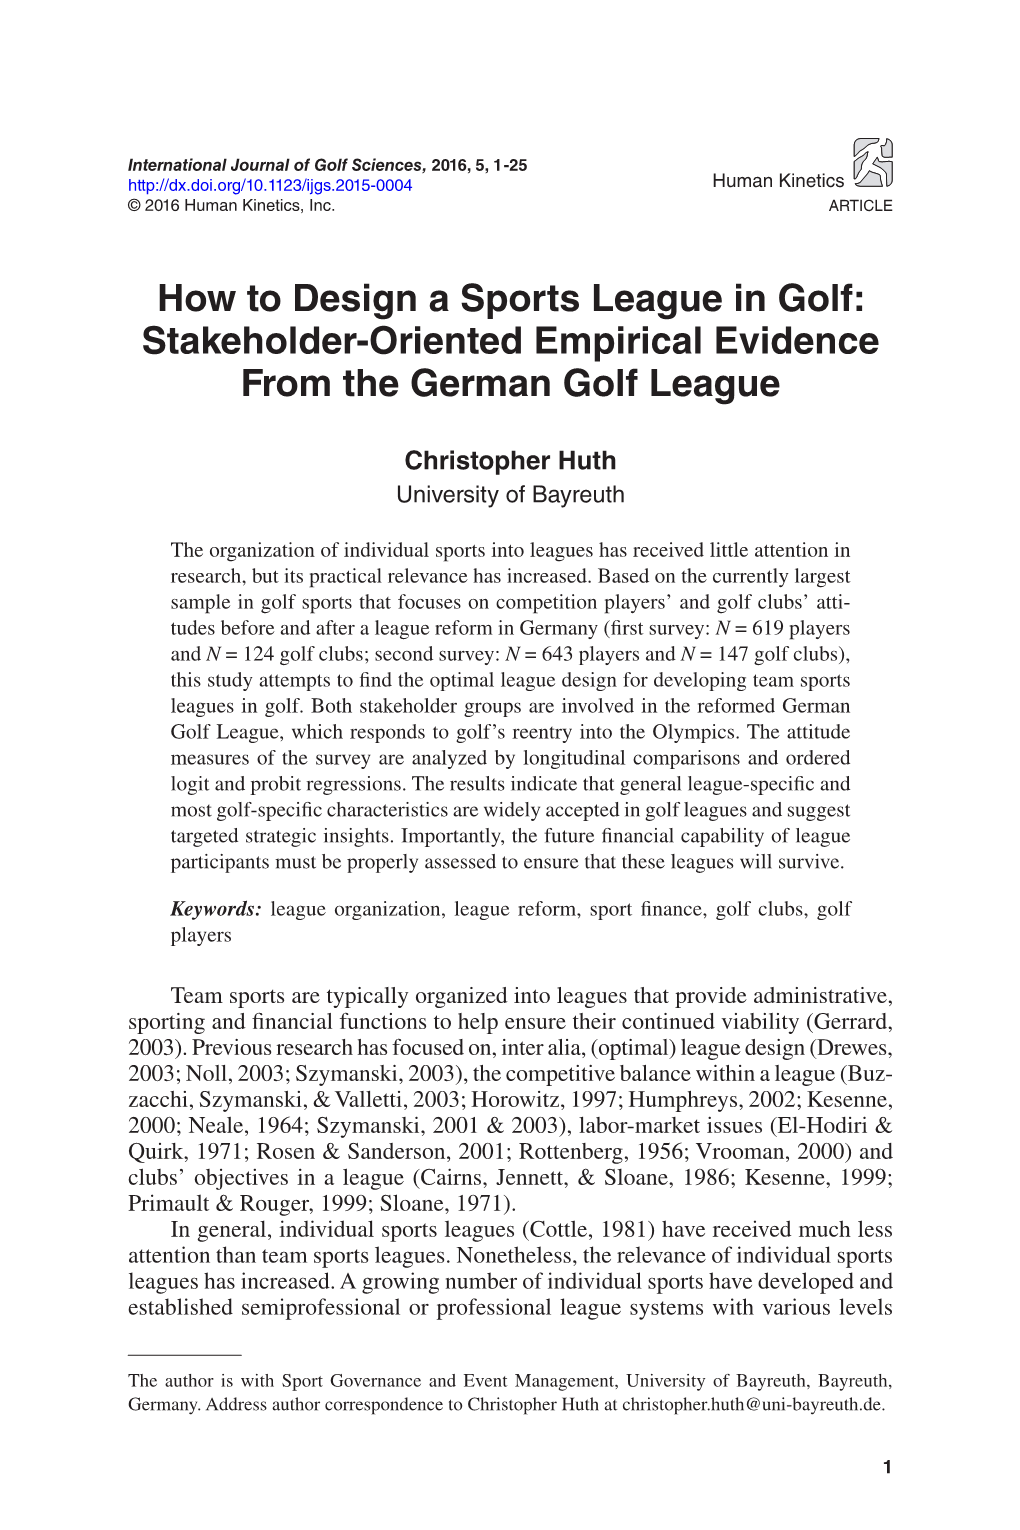 How to Design a Sports League in Golf: Stakeholder-Oriented Empirical Evidence from the German Golf League